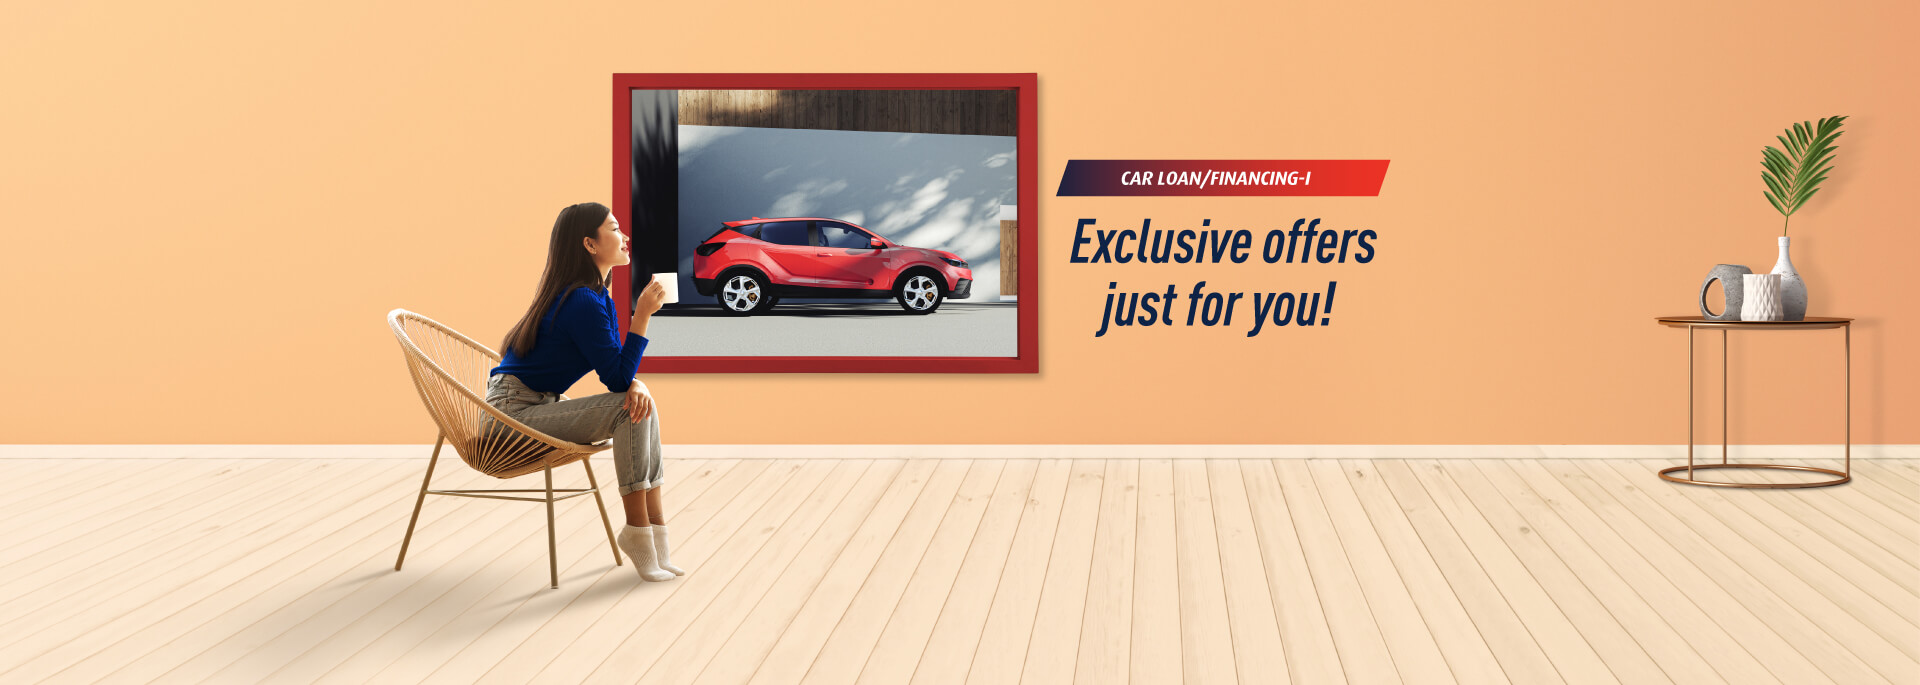 Enjoy special benefits when you apply for a new car loan/financing-i with us